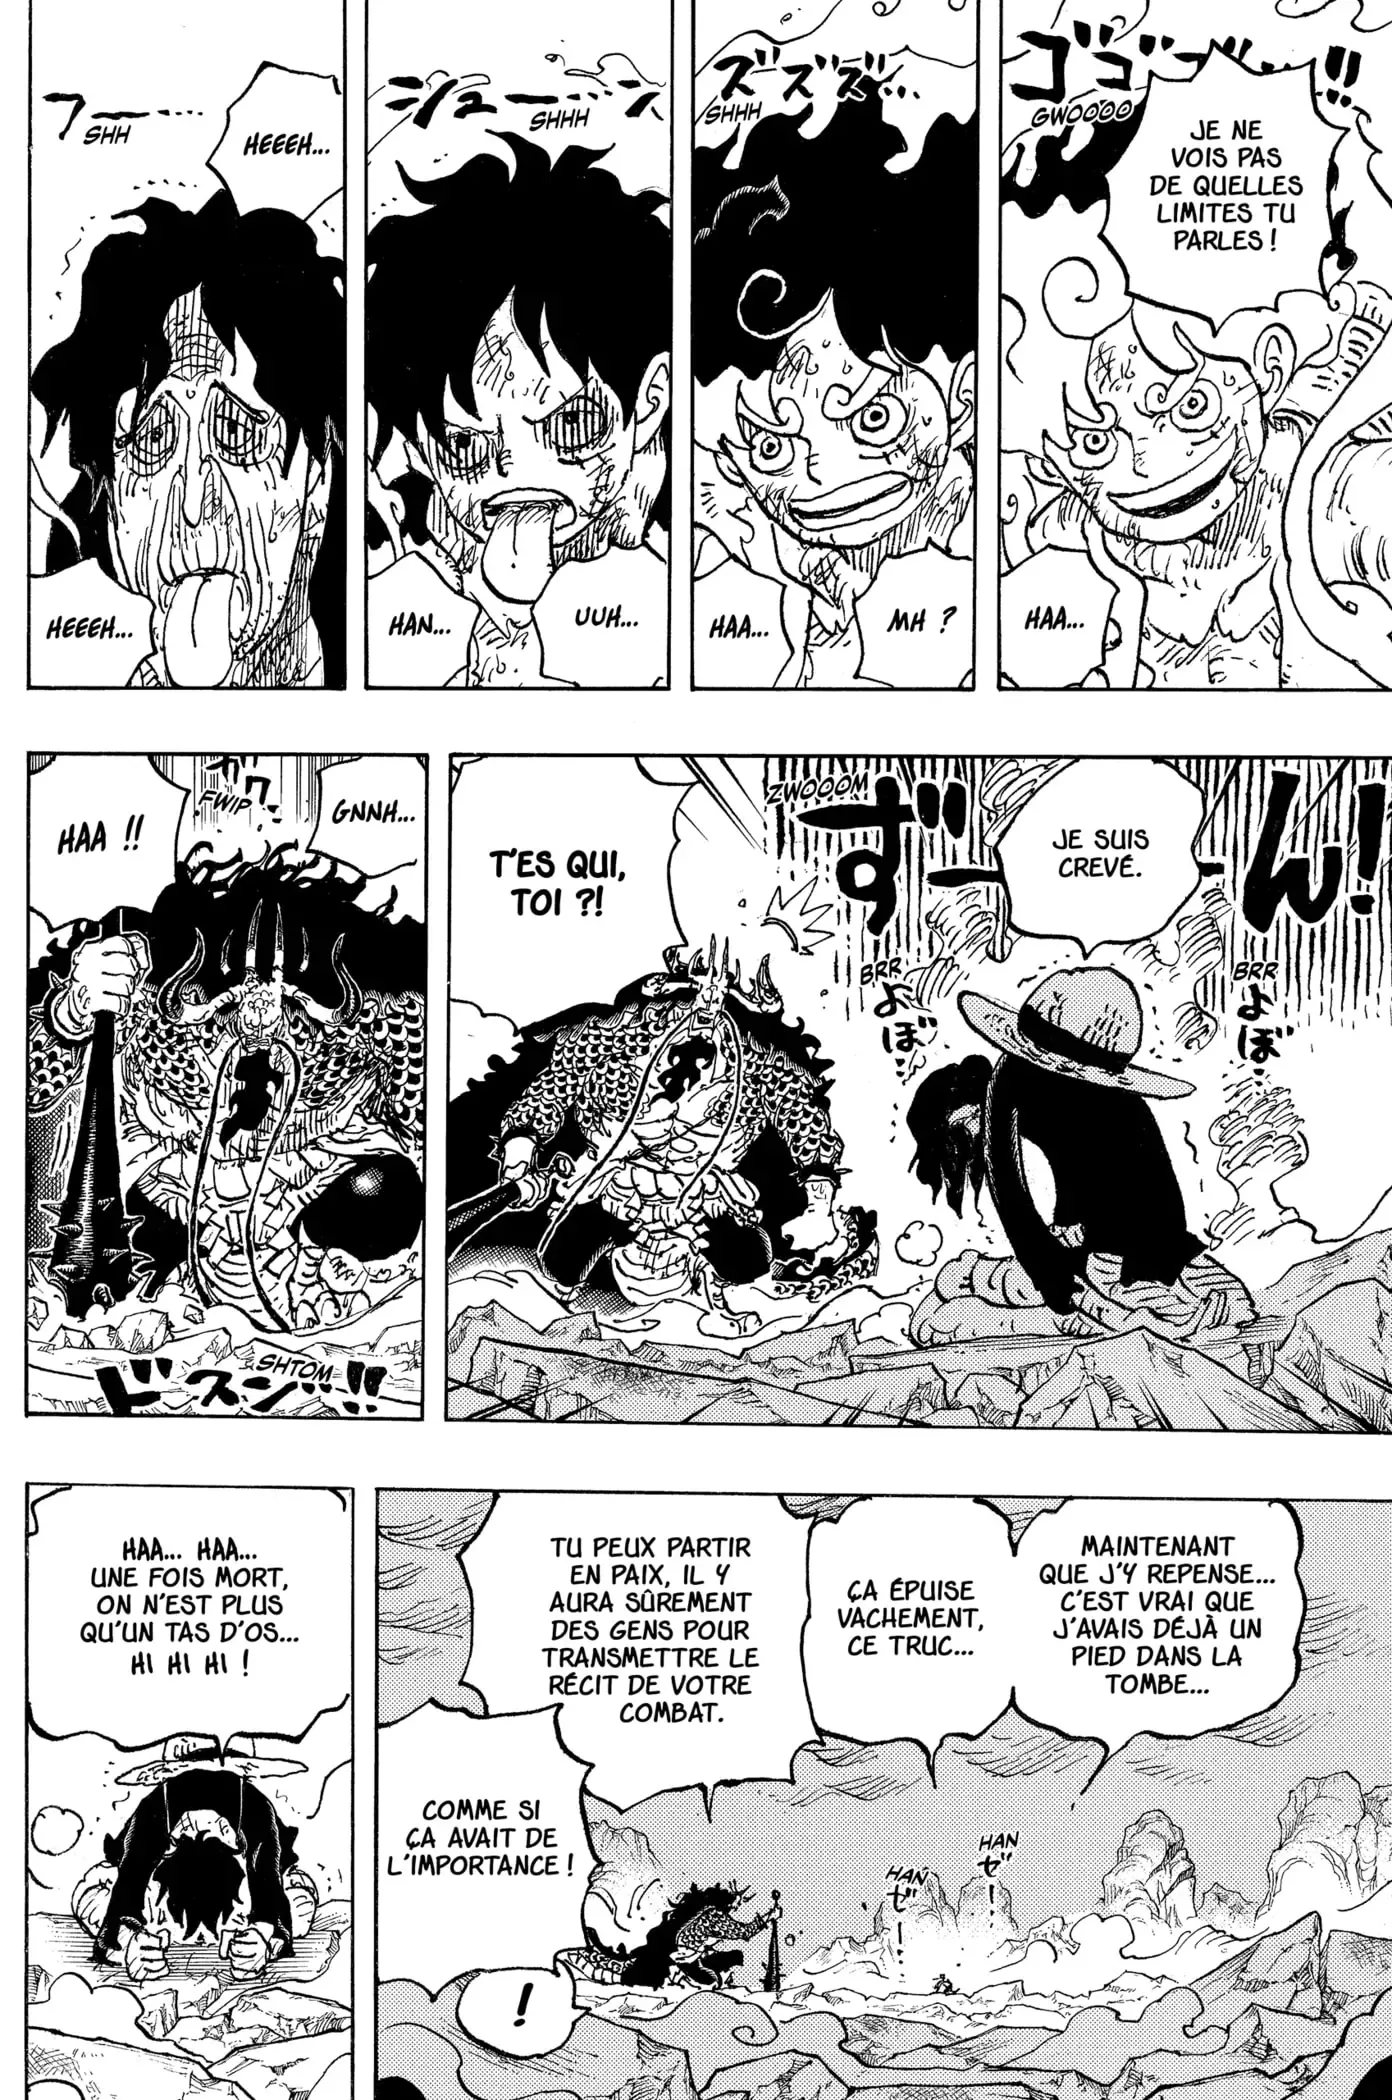 One Piece Chapter 1045: Next Level, Page 15